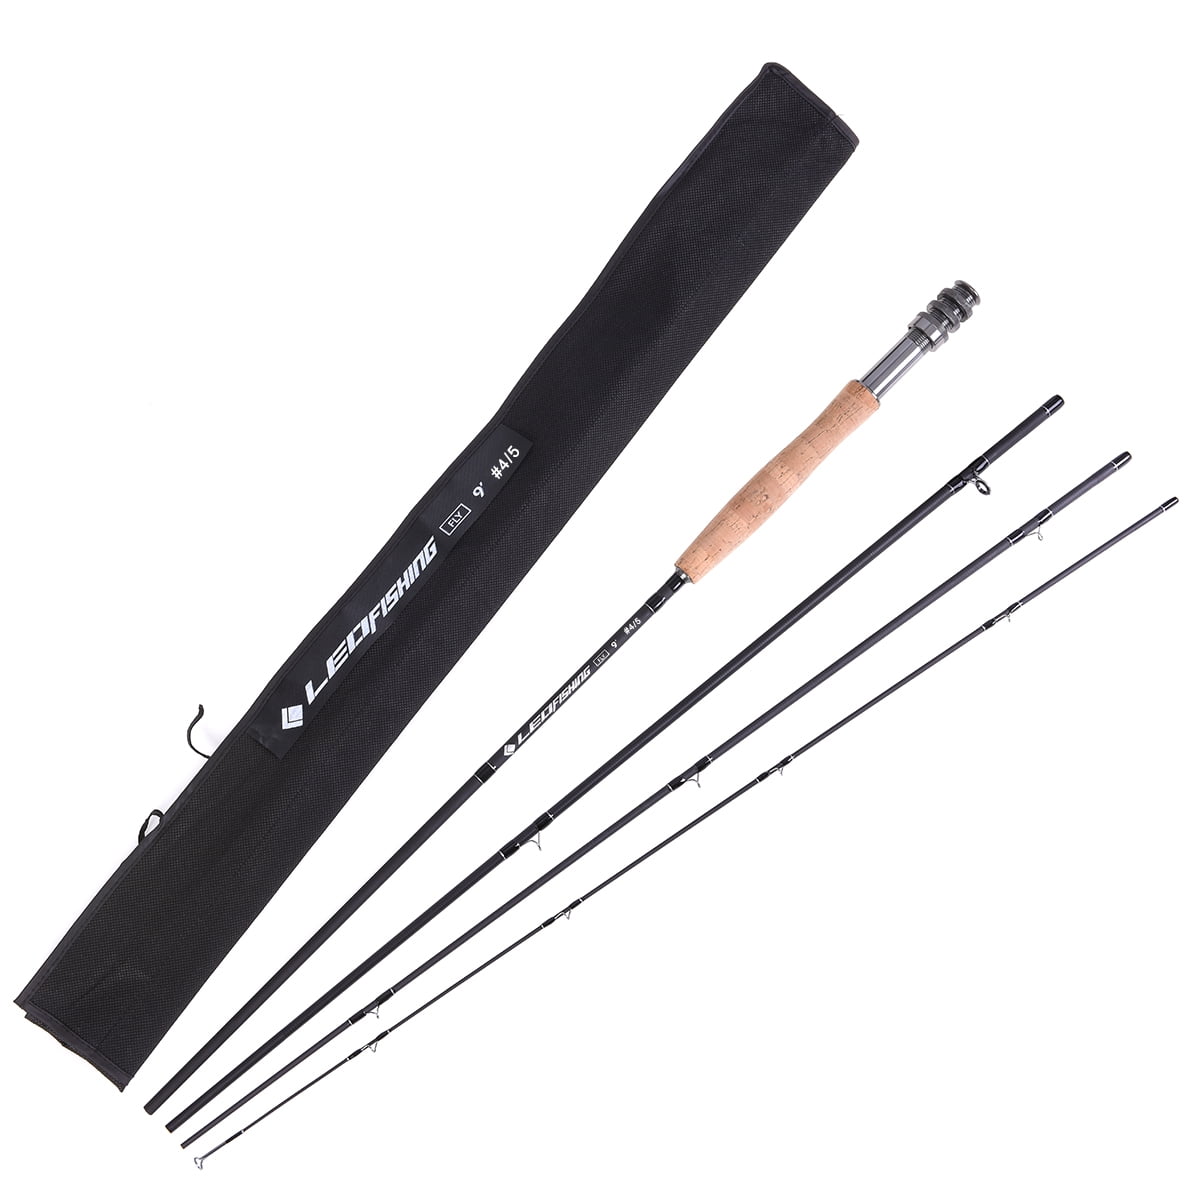 Outdoor Carbon Fly Fishing Rod 9FT 2.7M 4 Section Fishing Rod Fishing Pole UK 